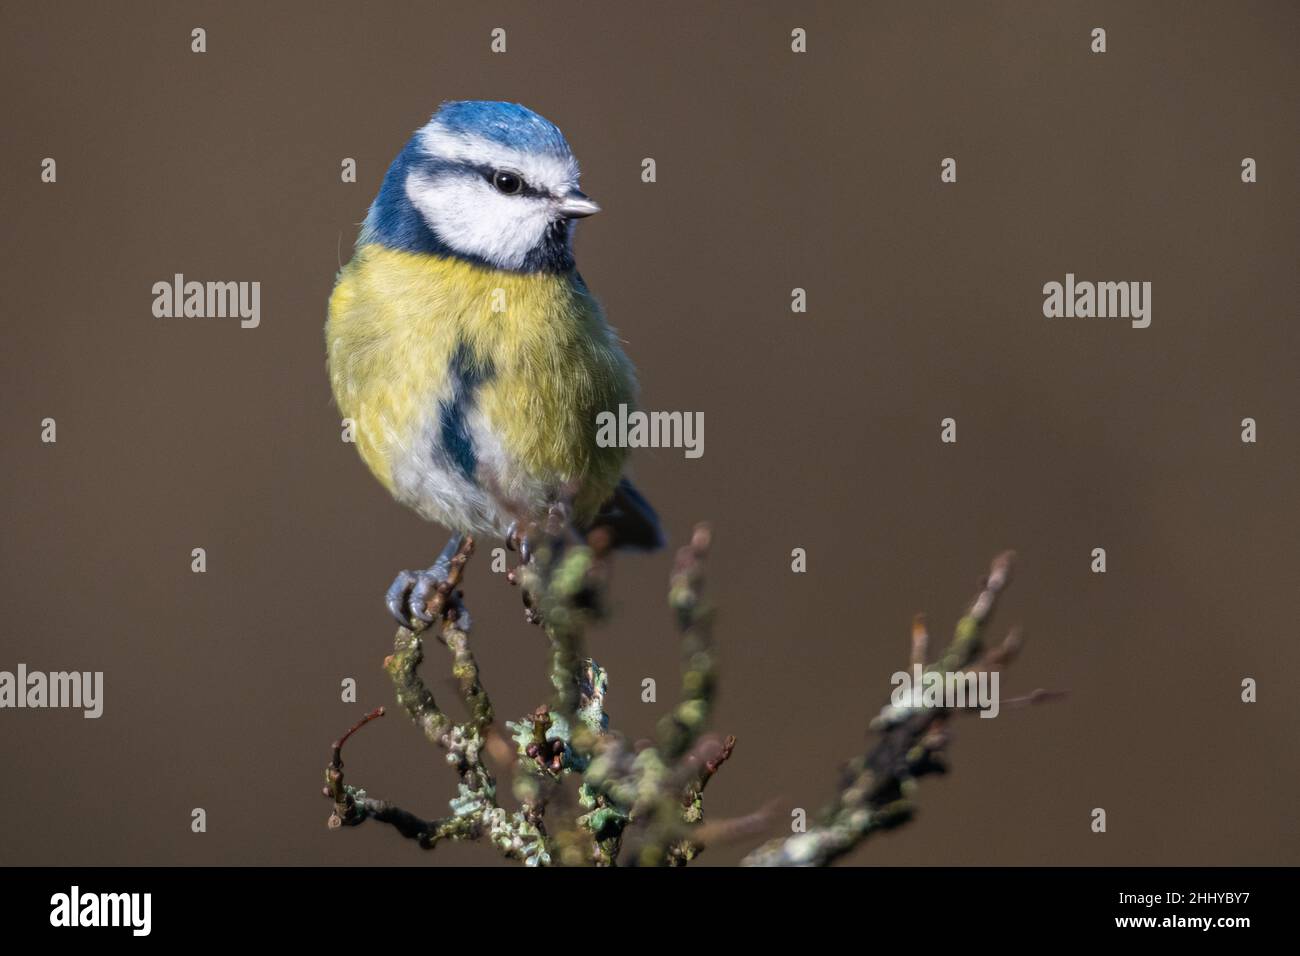 Blue tit sitting on a wooden twig with a plain brownish background Stock Photo